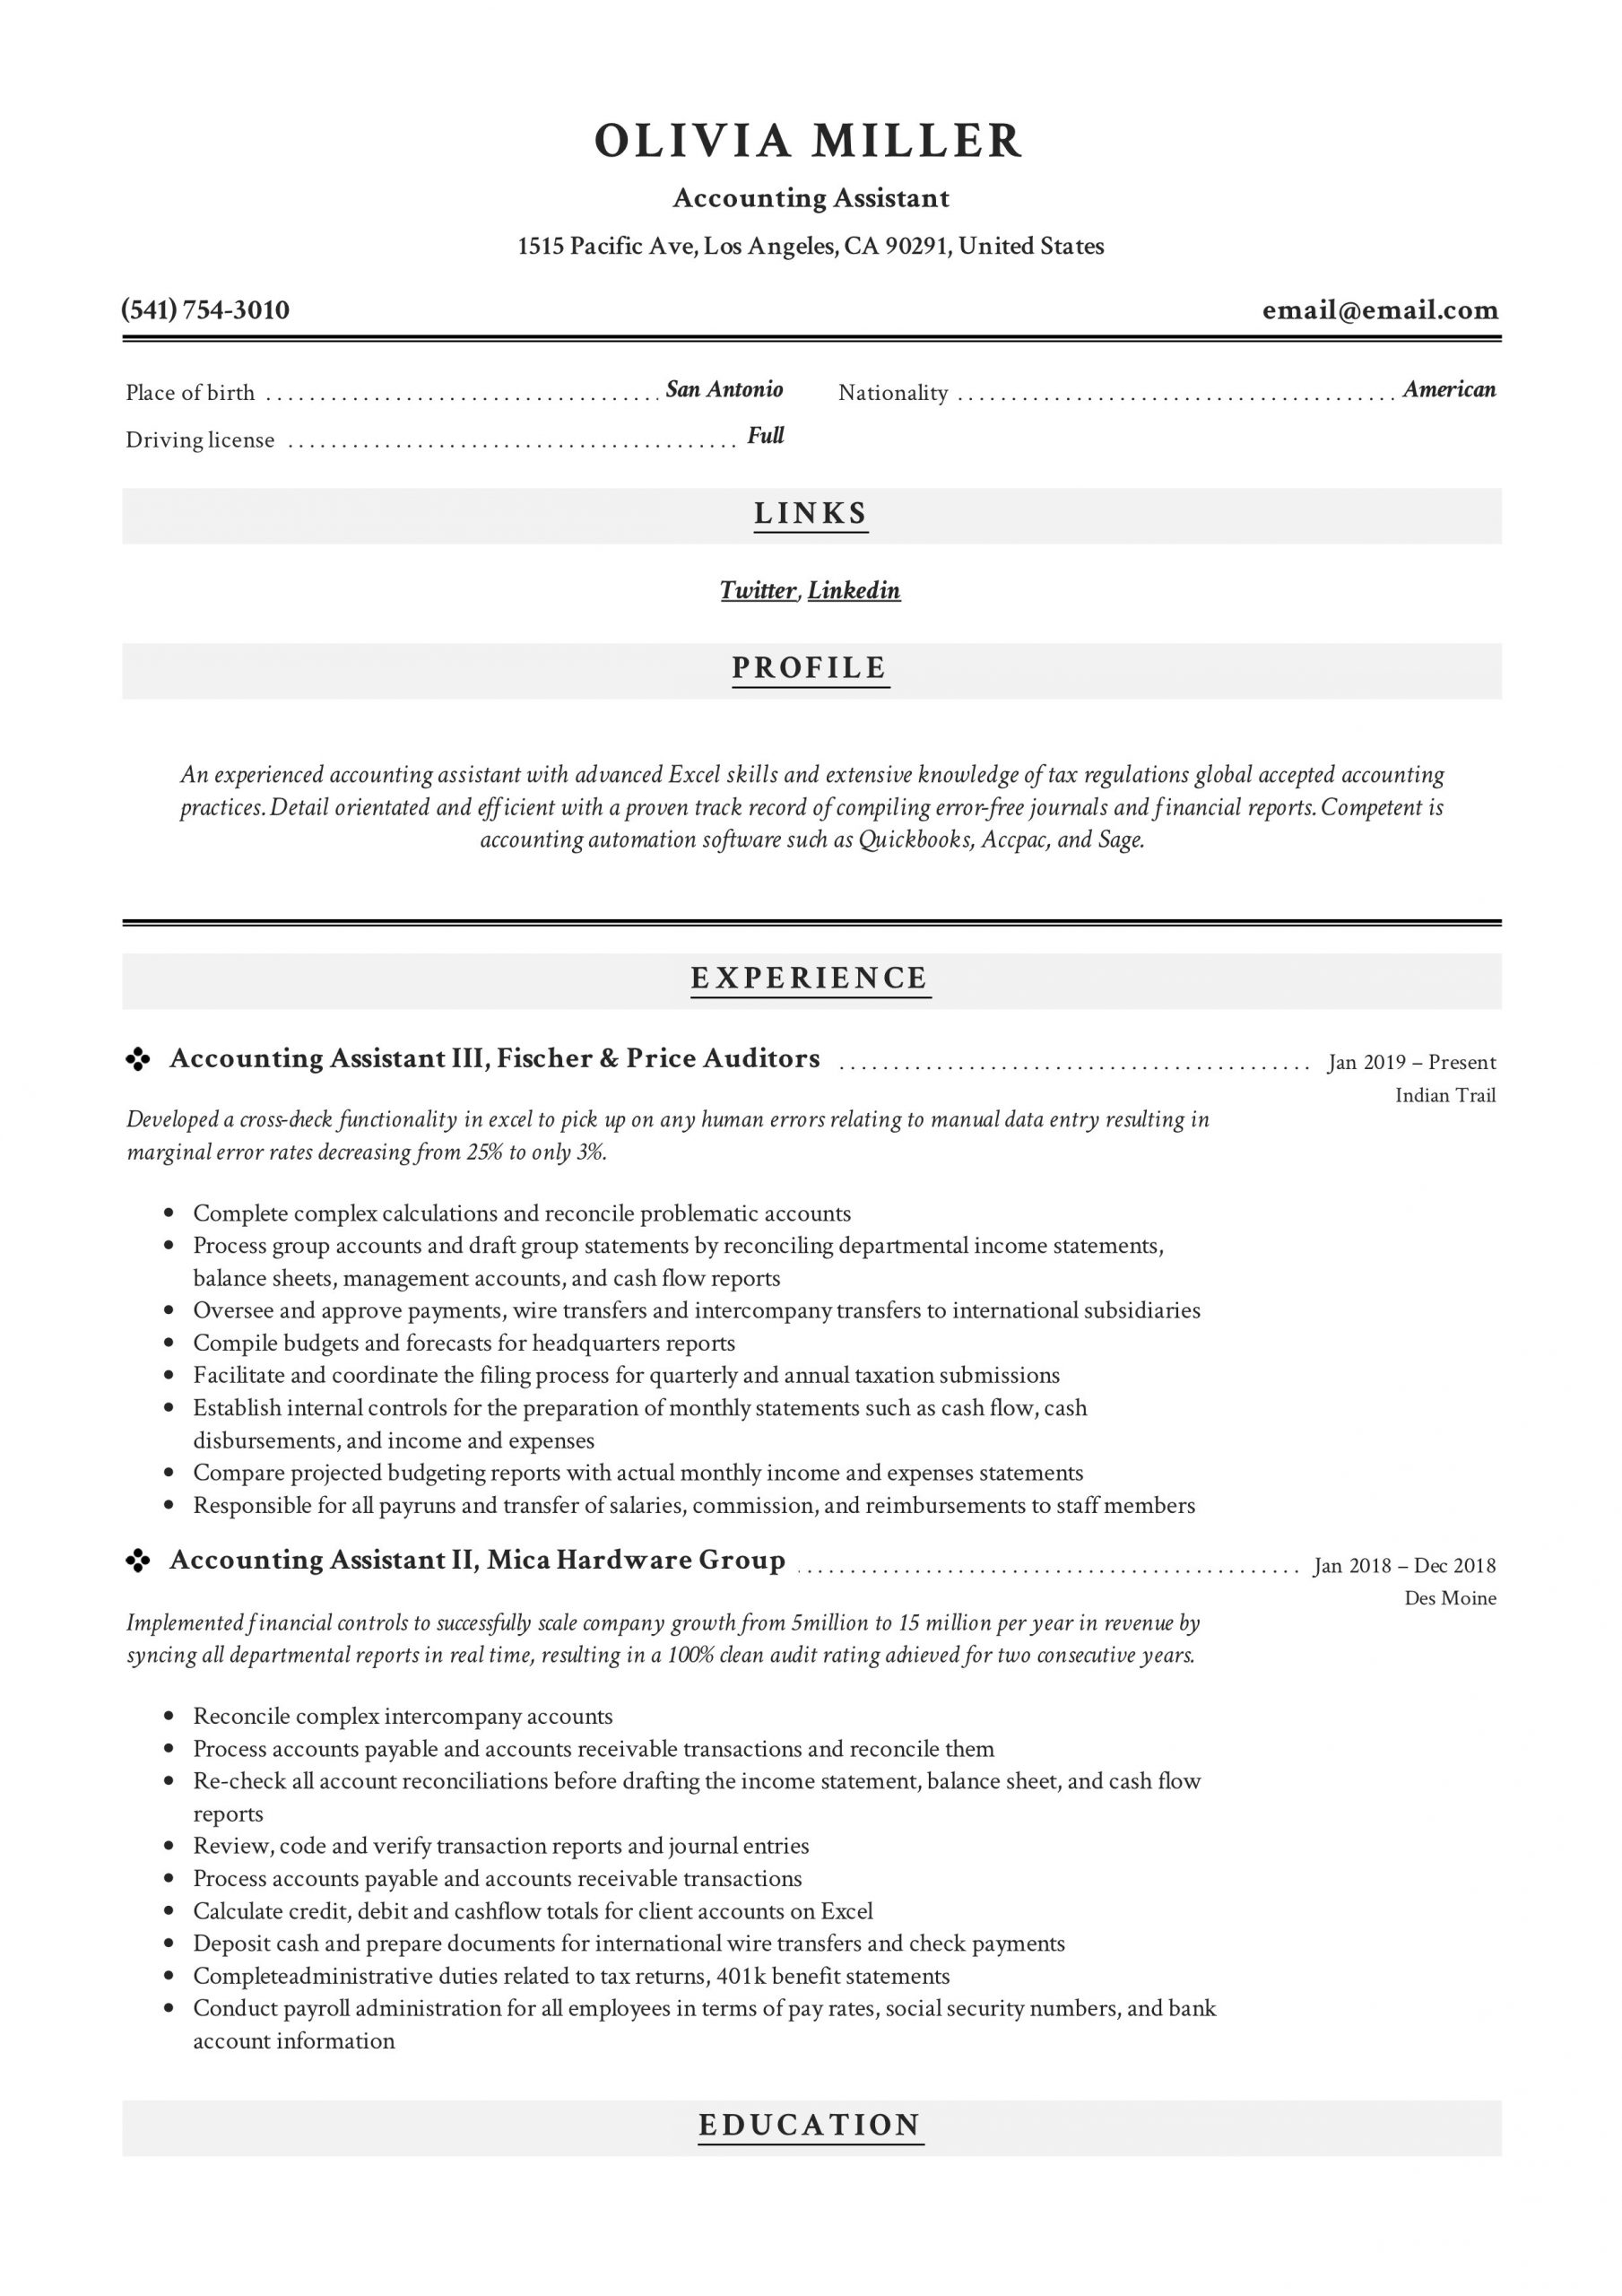 Resume Samples for Experienced Finance Professionals Accounting & Finance Resume Examples – 2021 – Free – Pdf